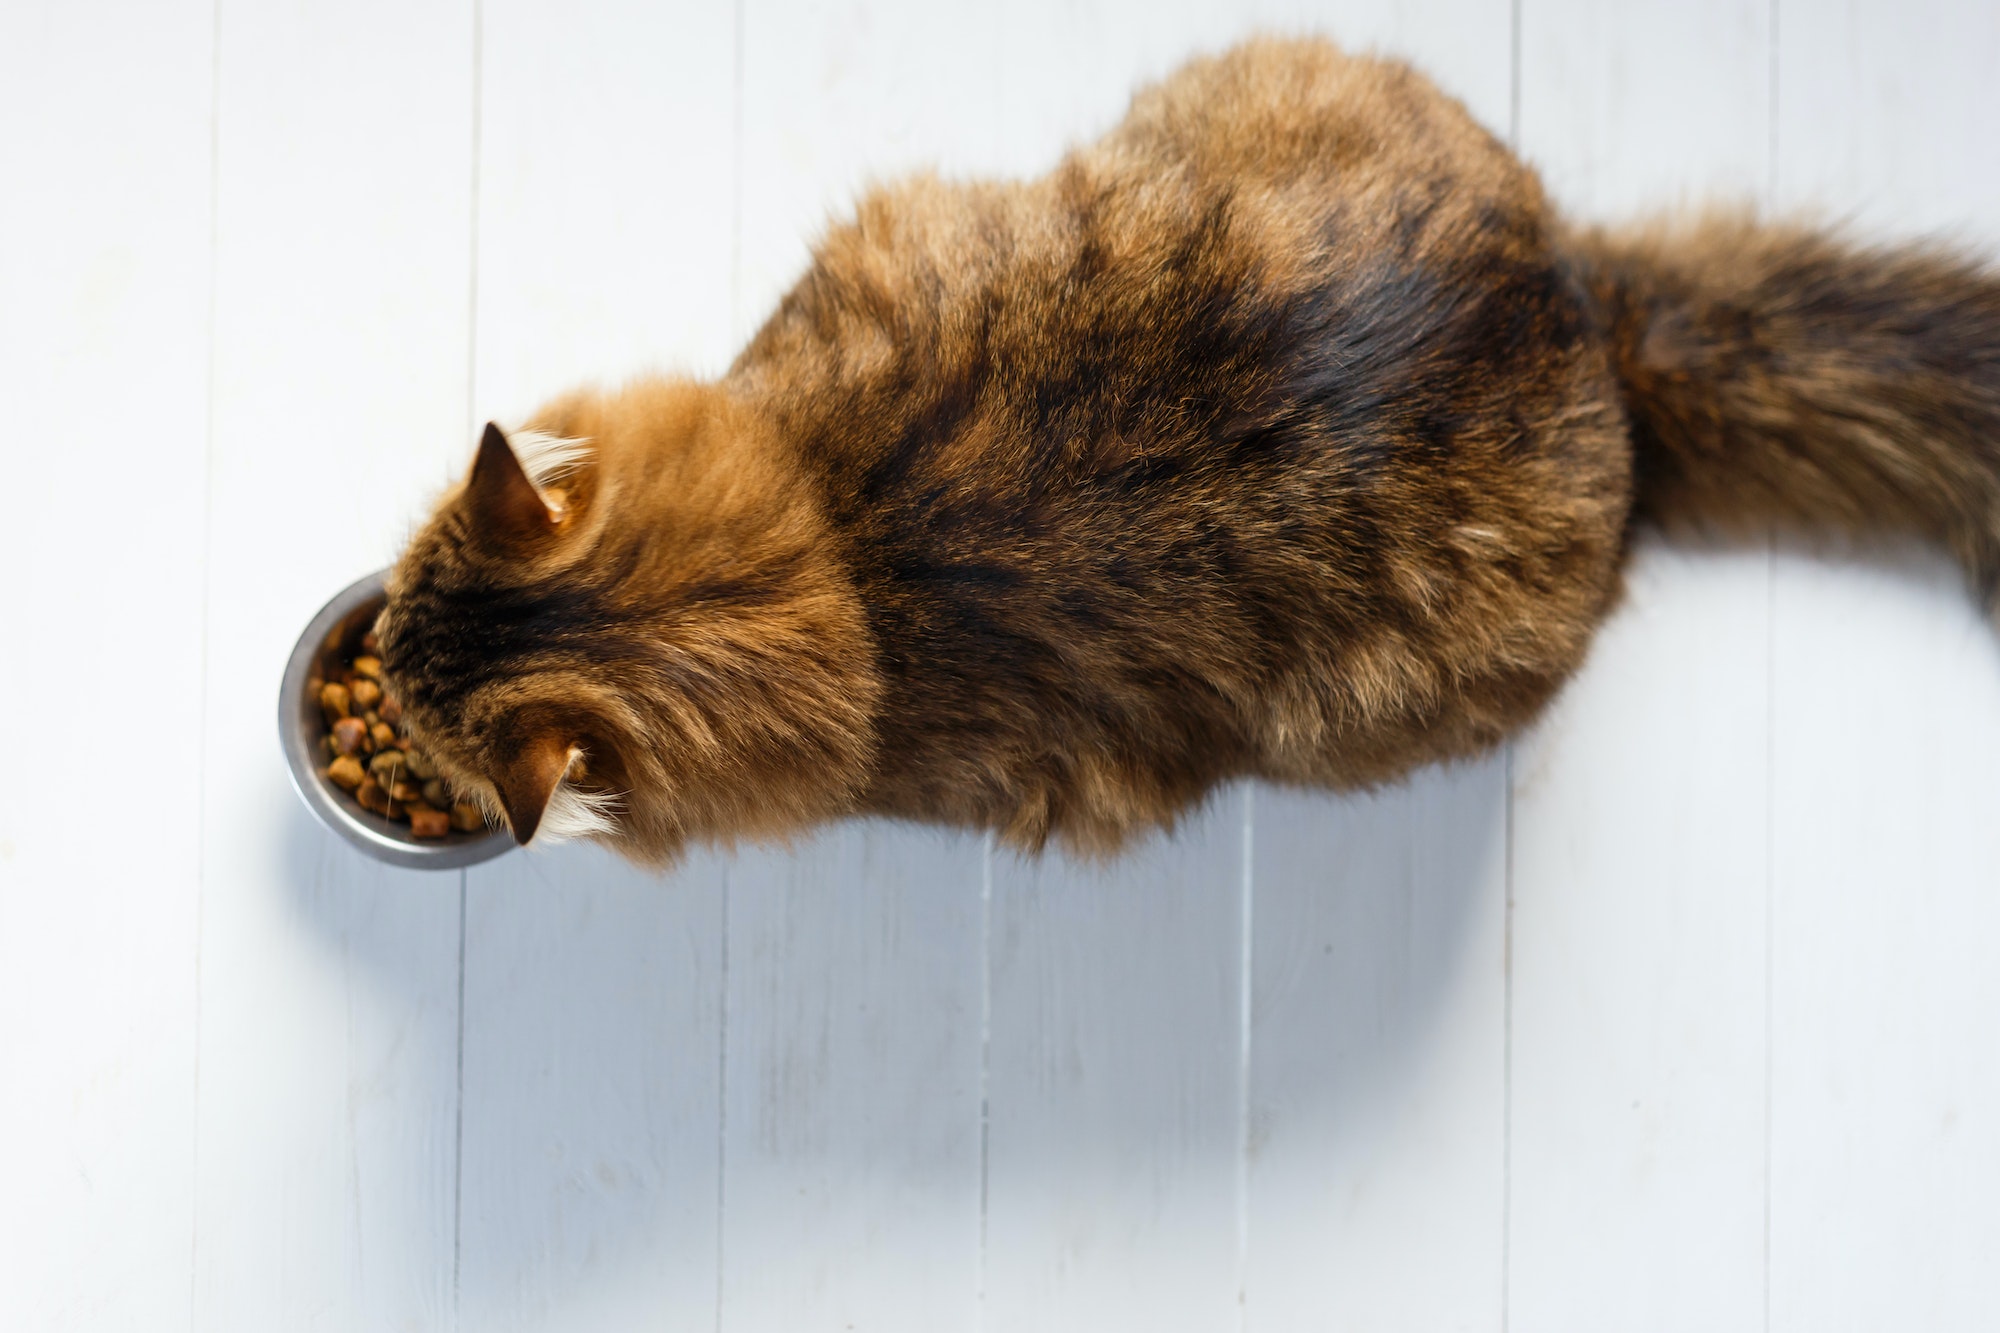 Cat eating from a bowl on white wooden planks